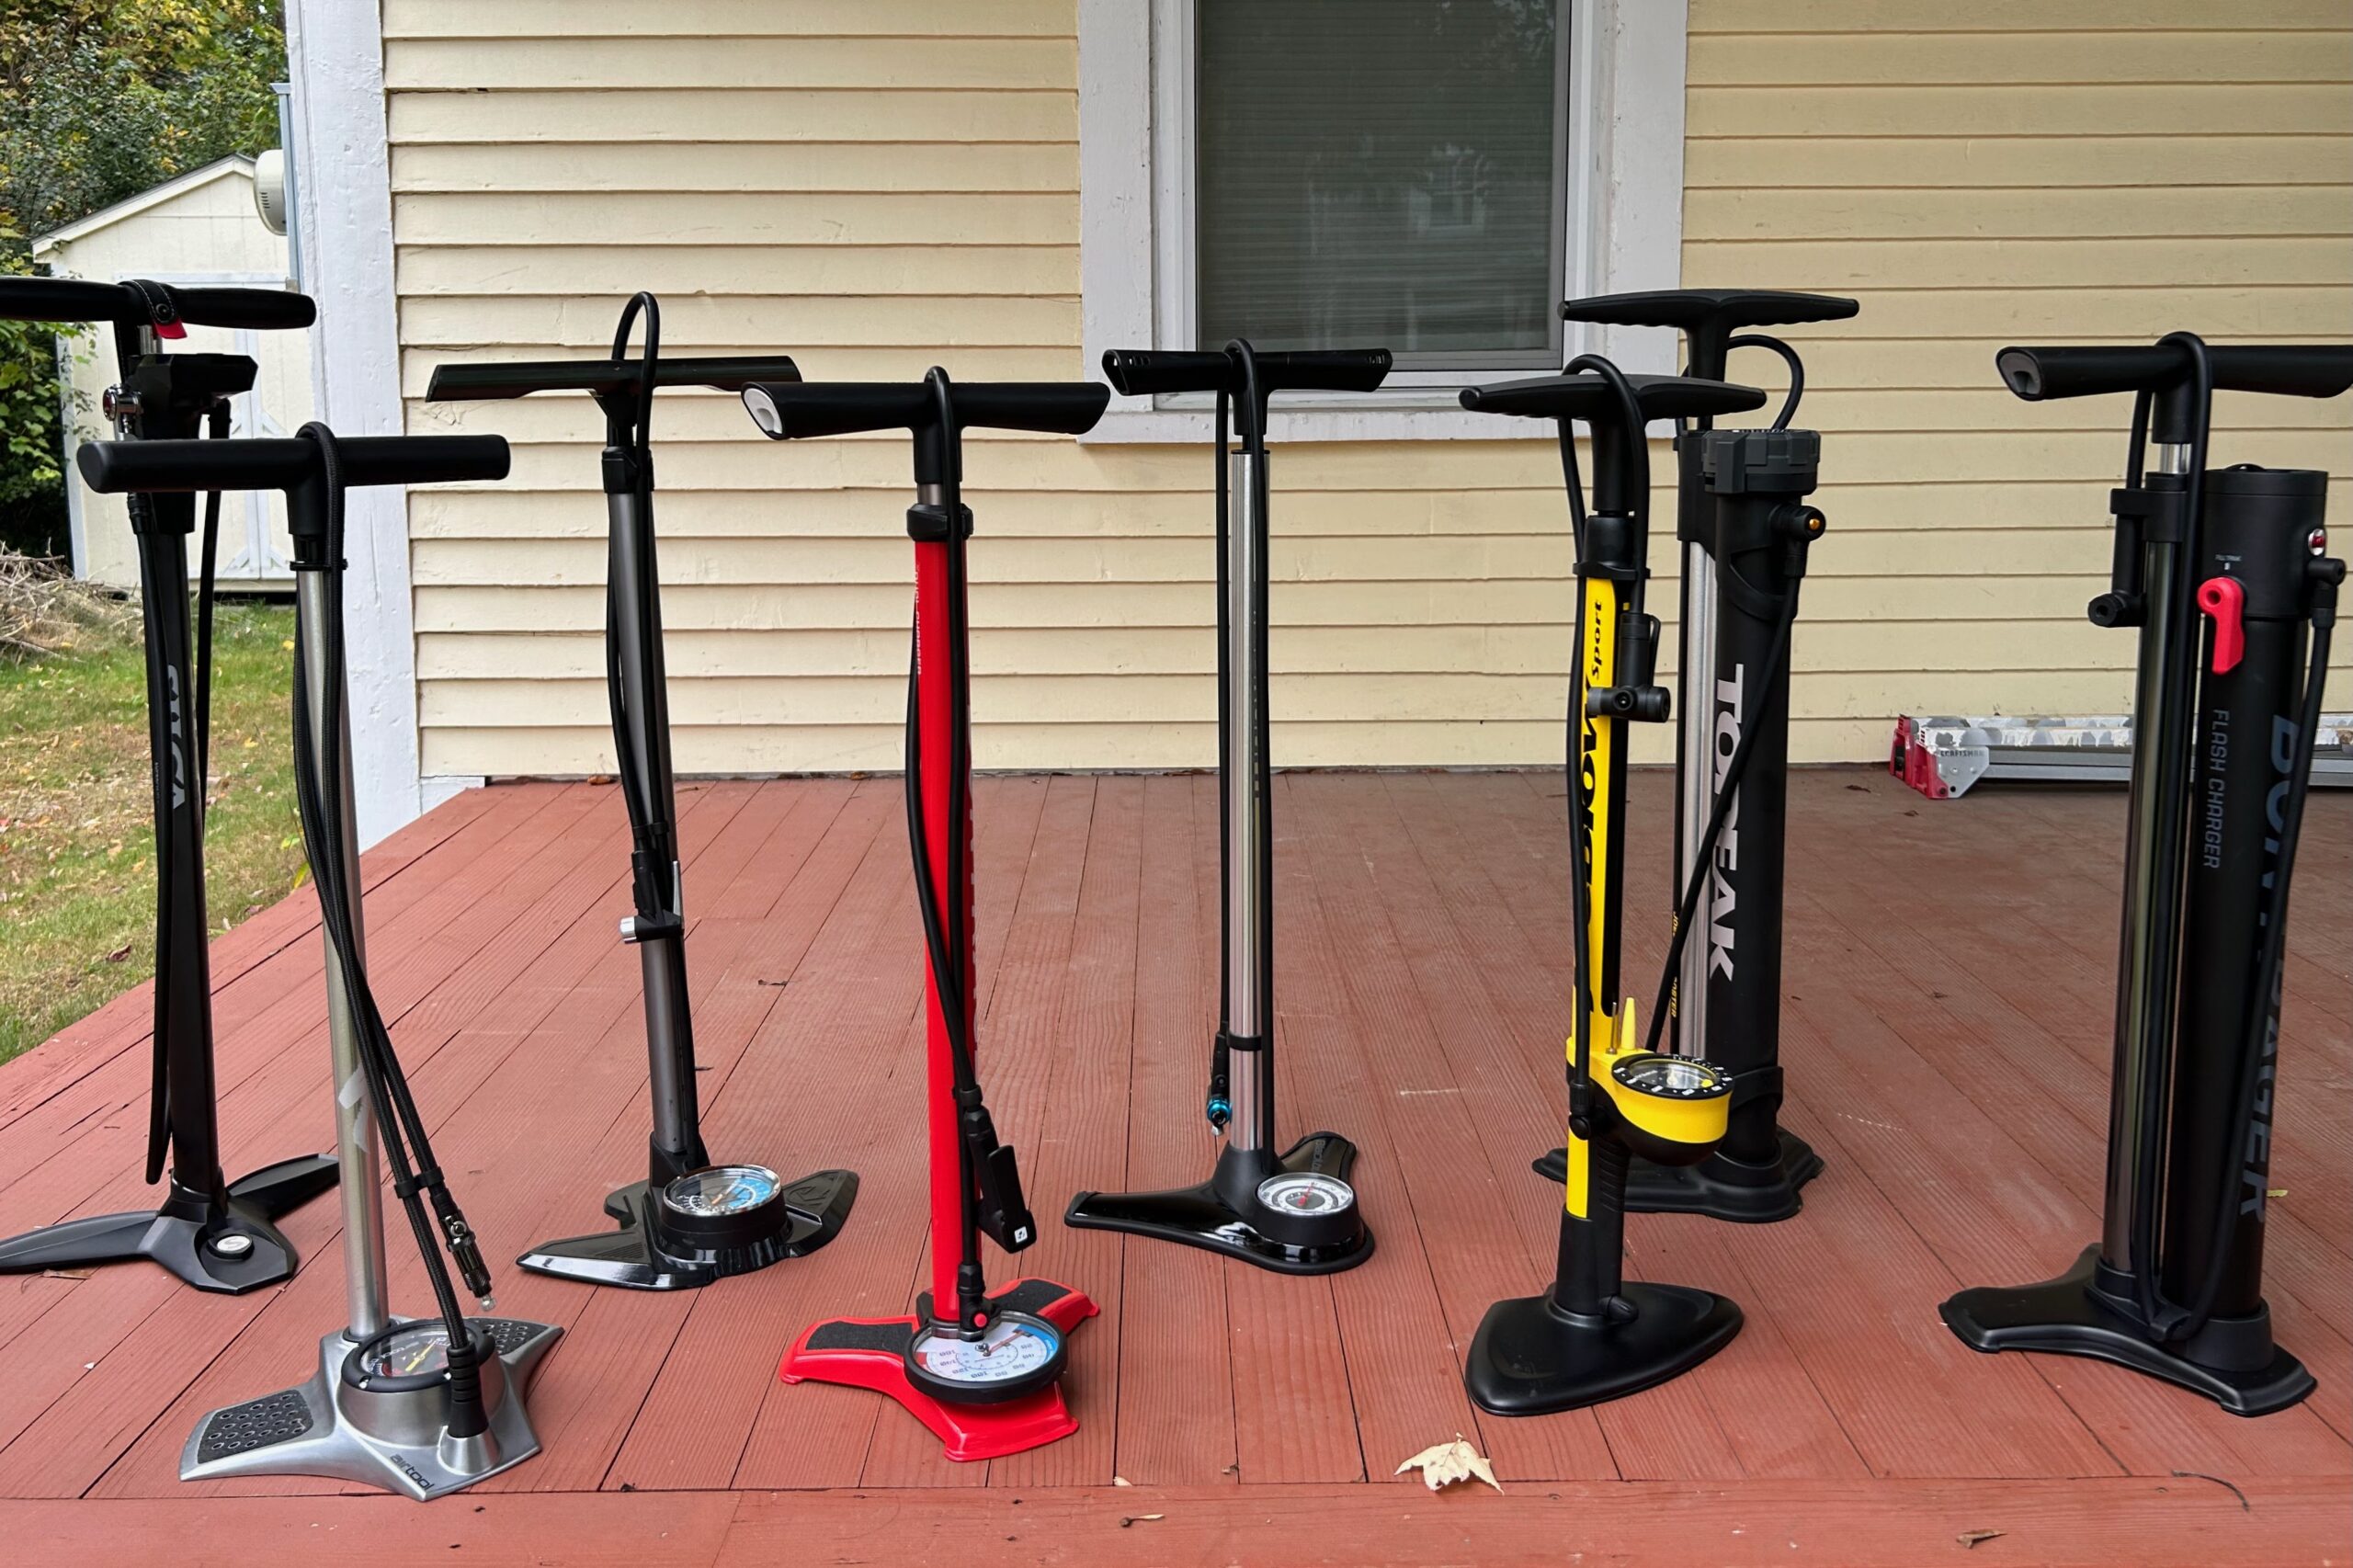 Group photo of most of the bike pumps we tested